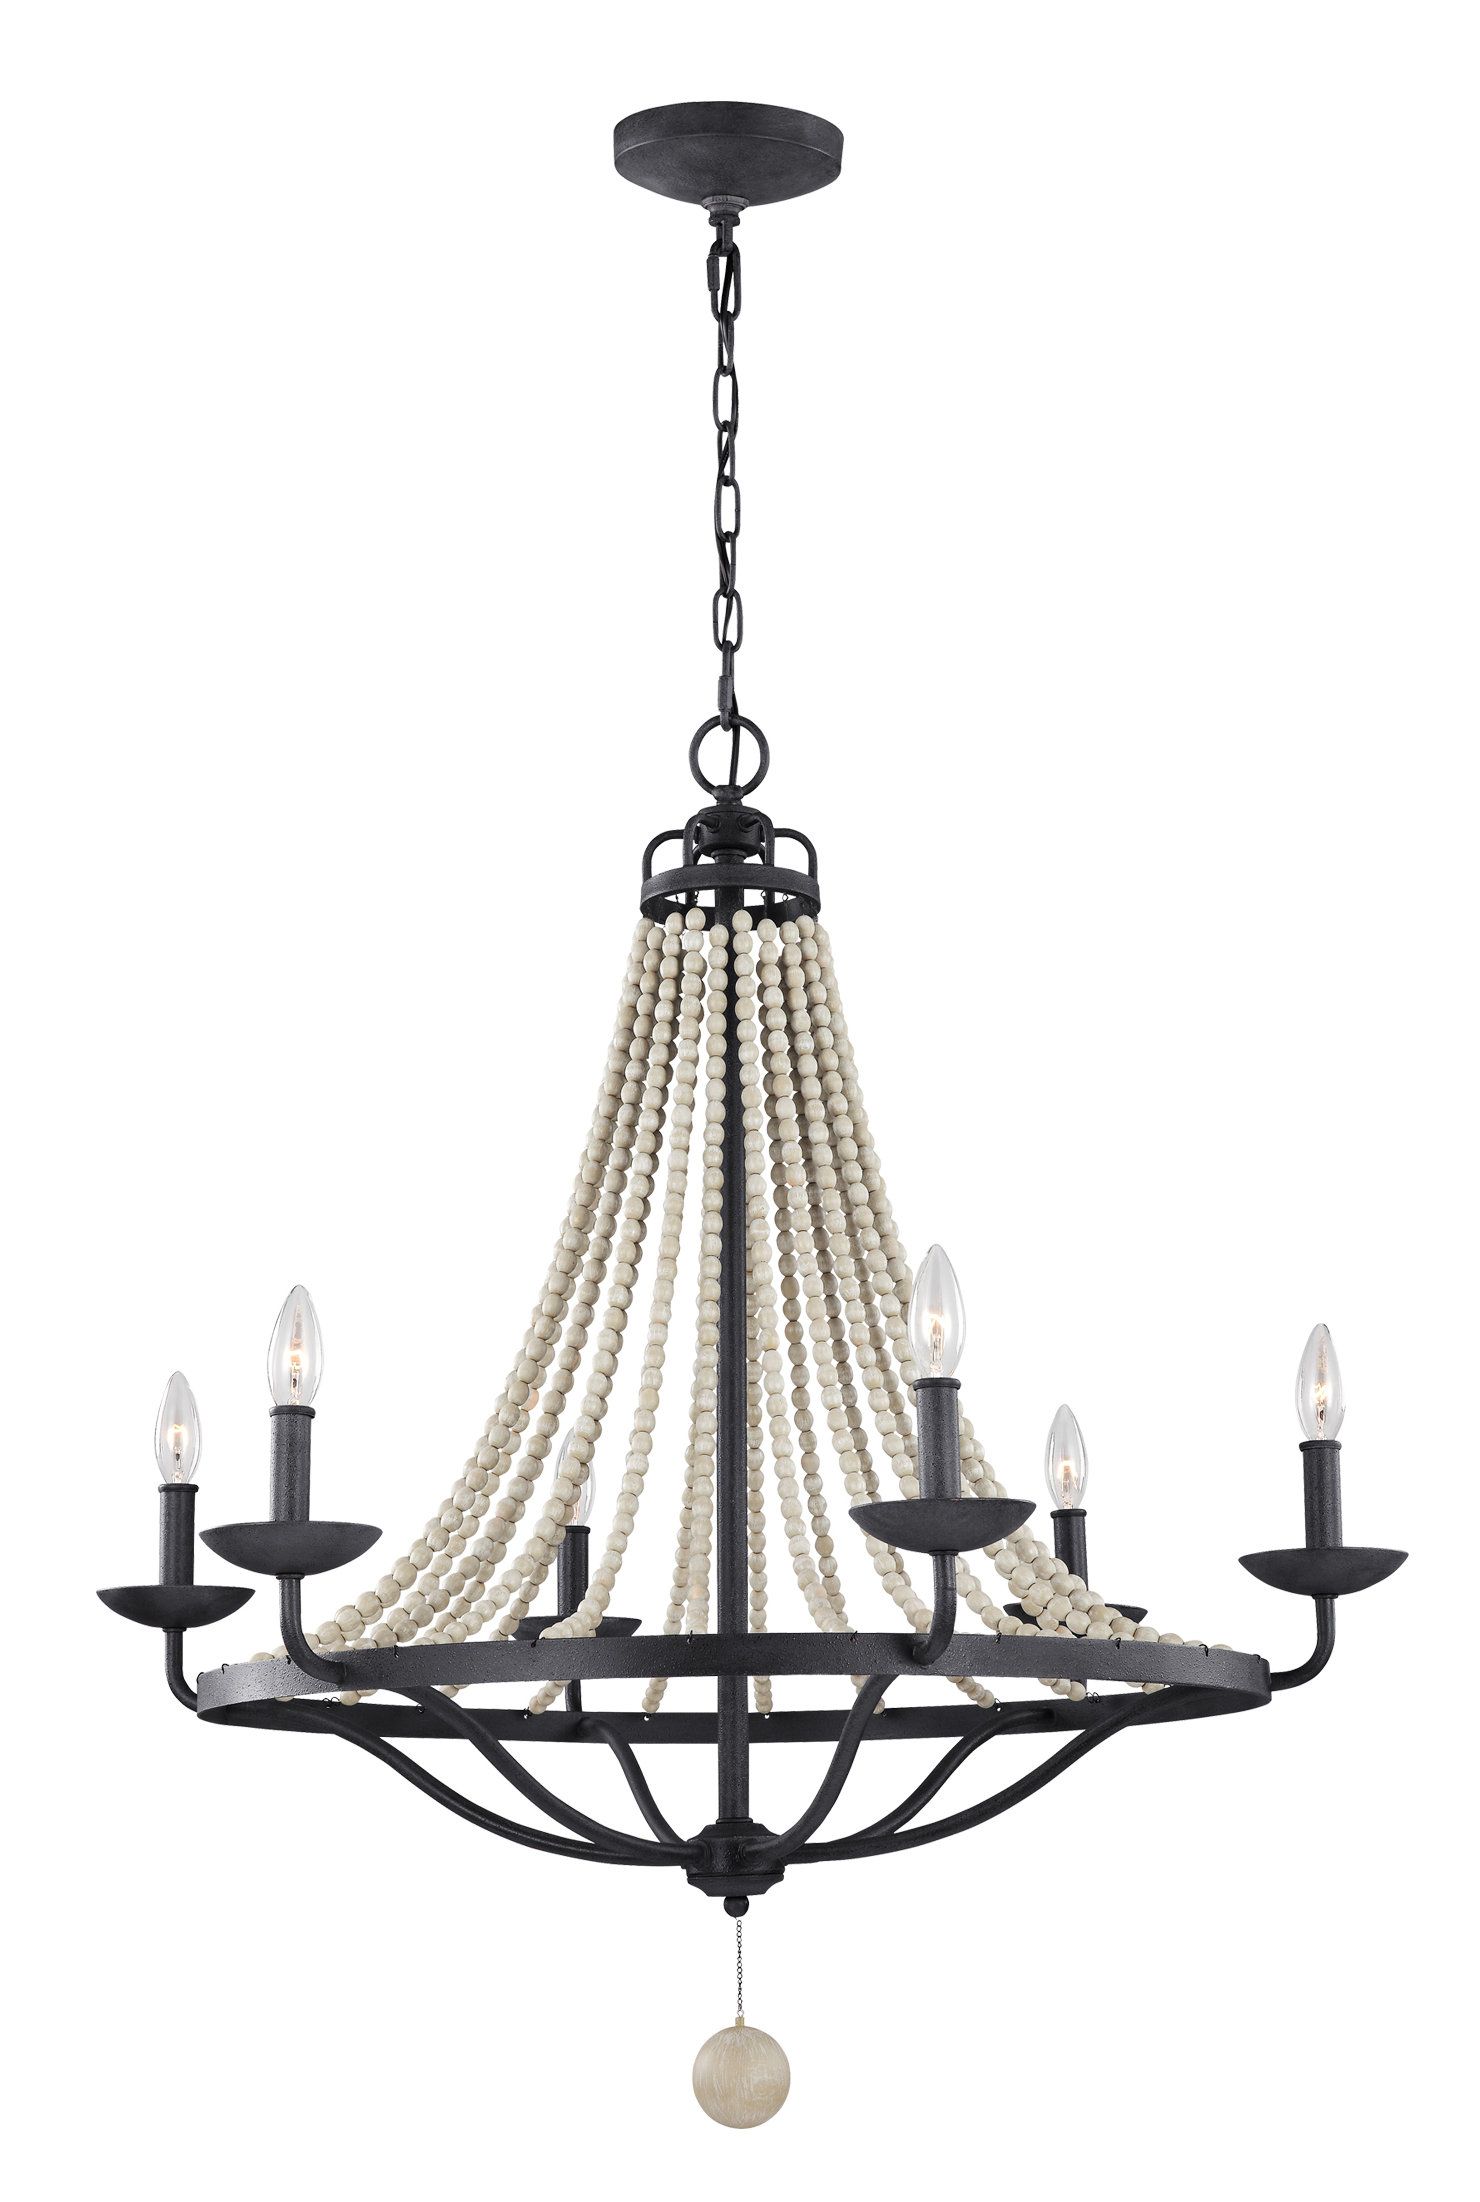 Granger 6 Light Empire Chandelier With Regard To Diaz 6 Light Candle Style Chandeliers (View 28 of 30)